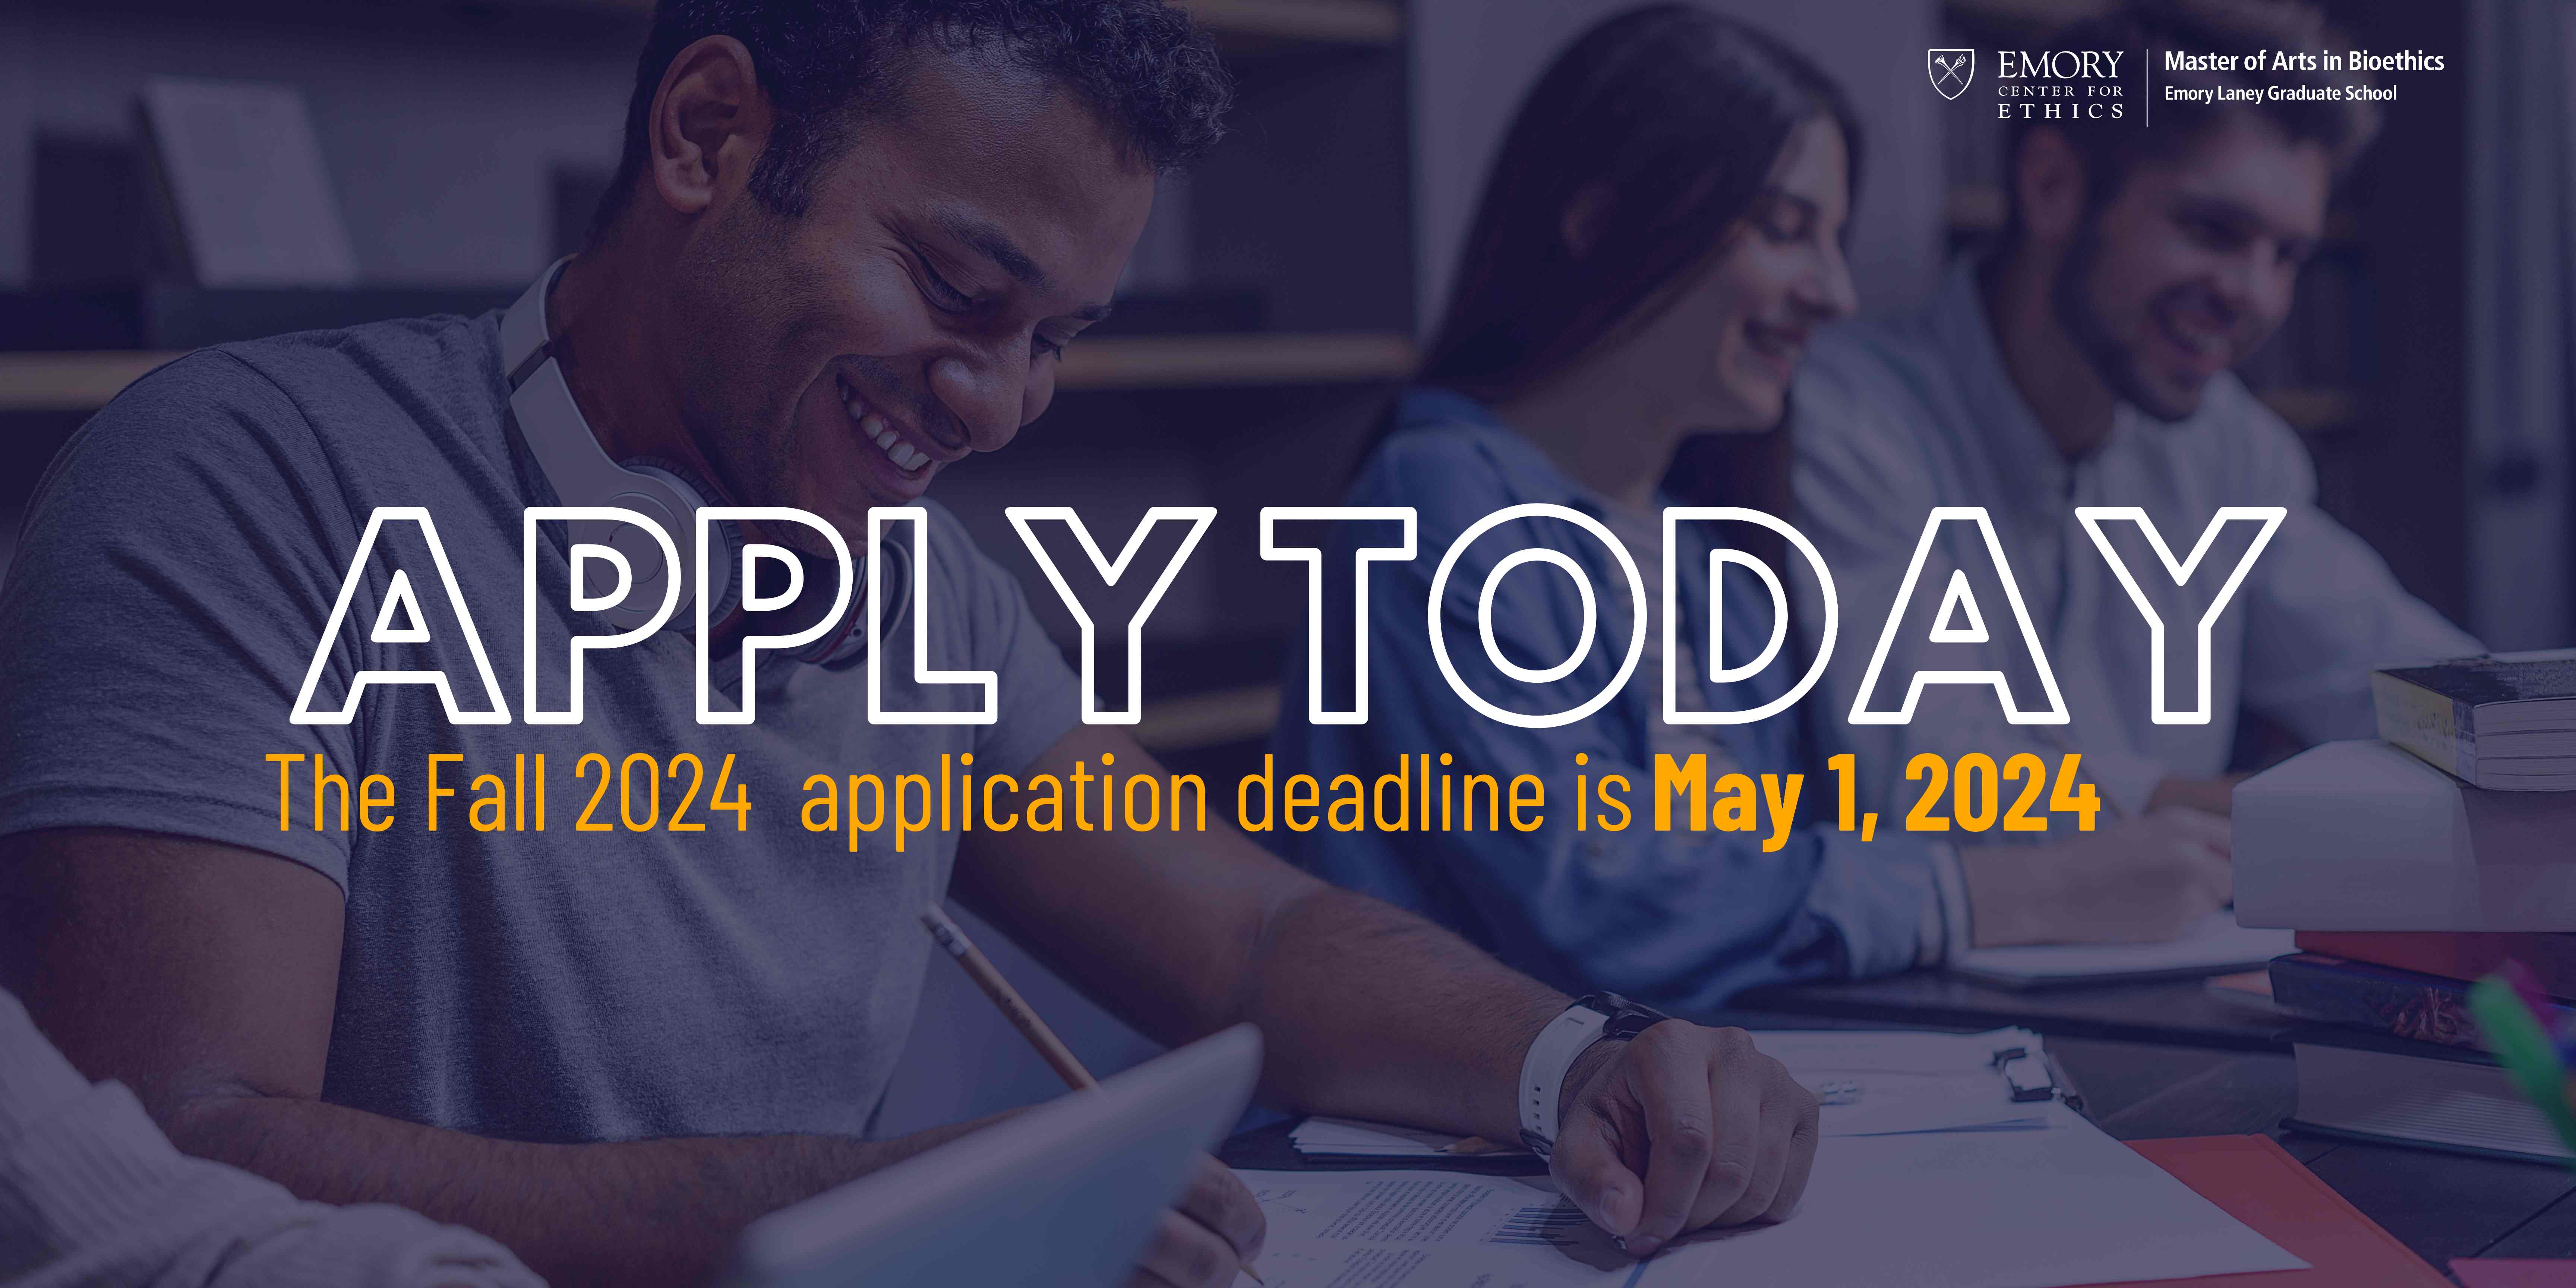 The Fall 2024 application deadline is May 1, 2024.